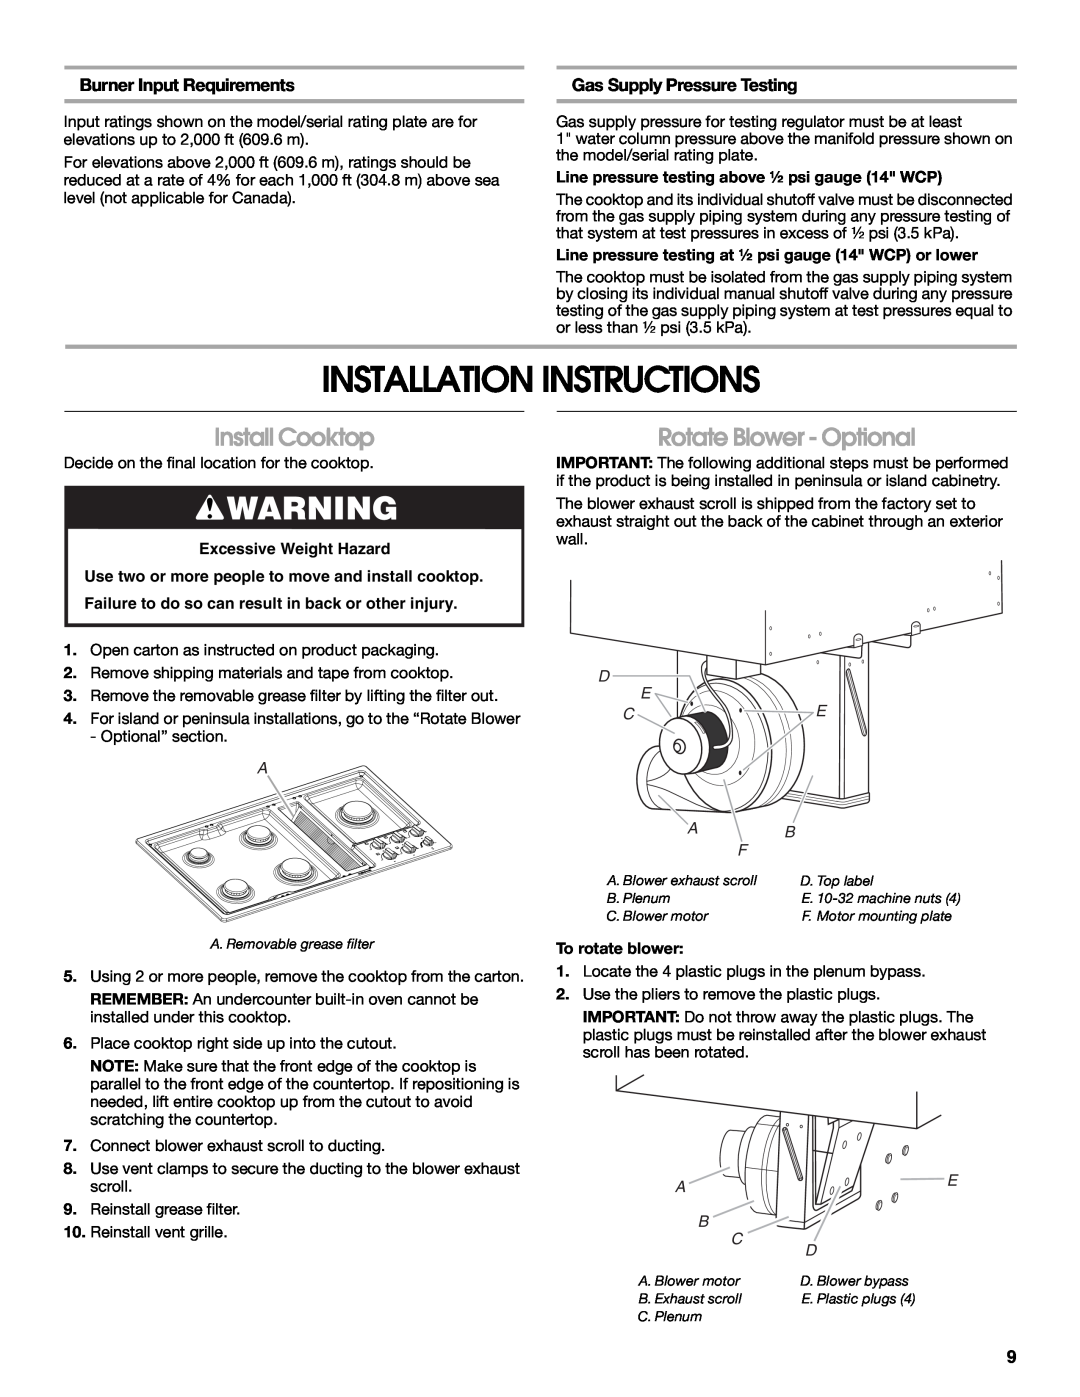 Jenn-Air W10526080A Installation Instructions, Install Cooktop, Rotate Blower - Optional, Burner Input Requirements 